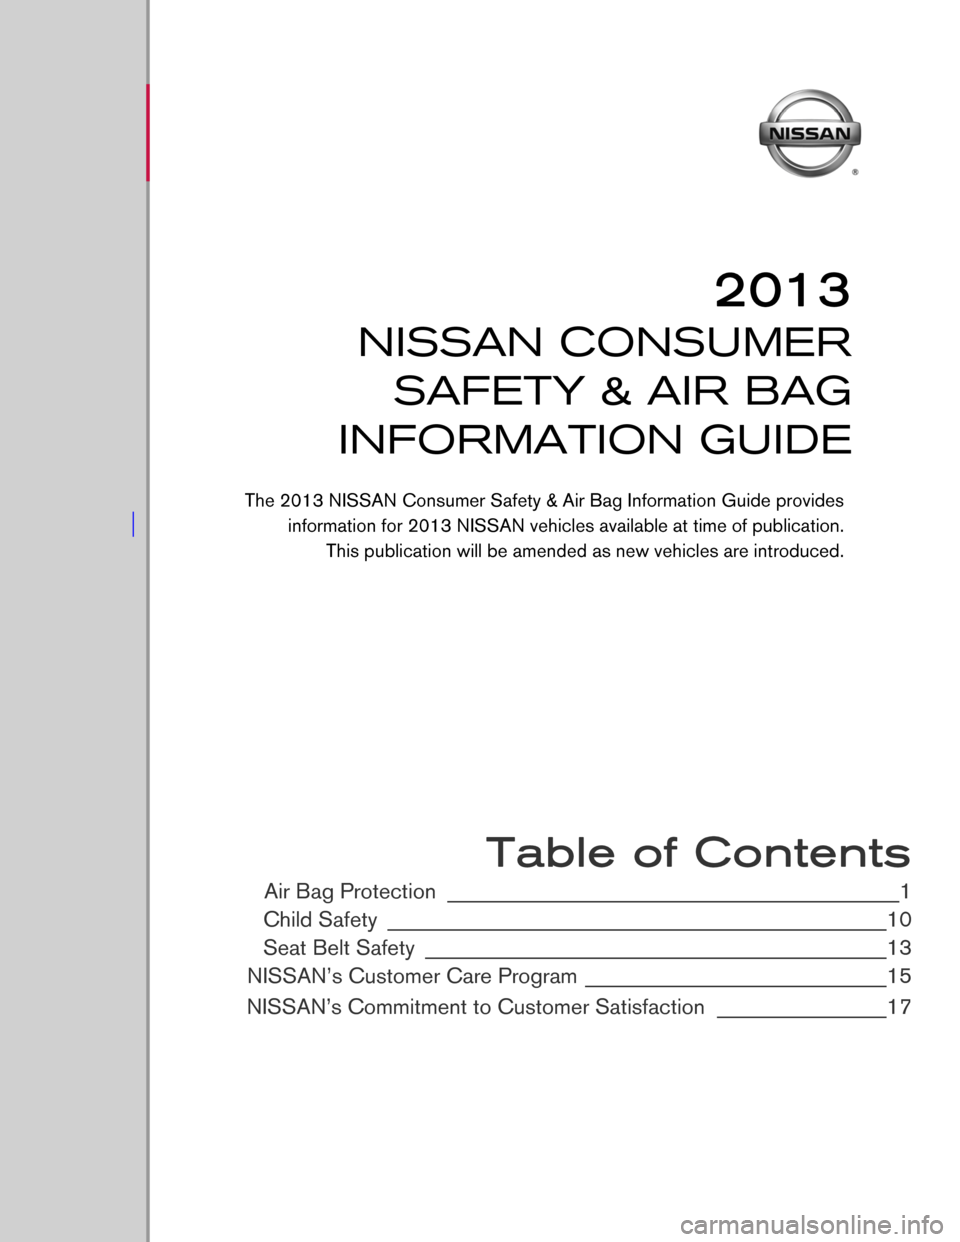 NISSAN ARMADA 2013 1.G Consumer Safety Air Bag Information Guide  
 
 
 
 
 
 
 
 
 
 
 
 
 
 
 
 
 
 
 
 
 
 
 Table of Contents
Air Bag Protection ________________________________________________1
Child Safety
 ____________________________________________________